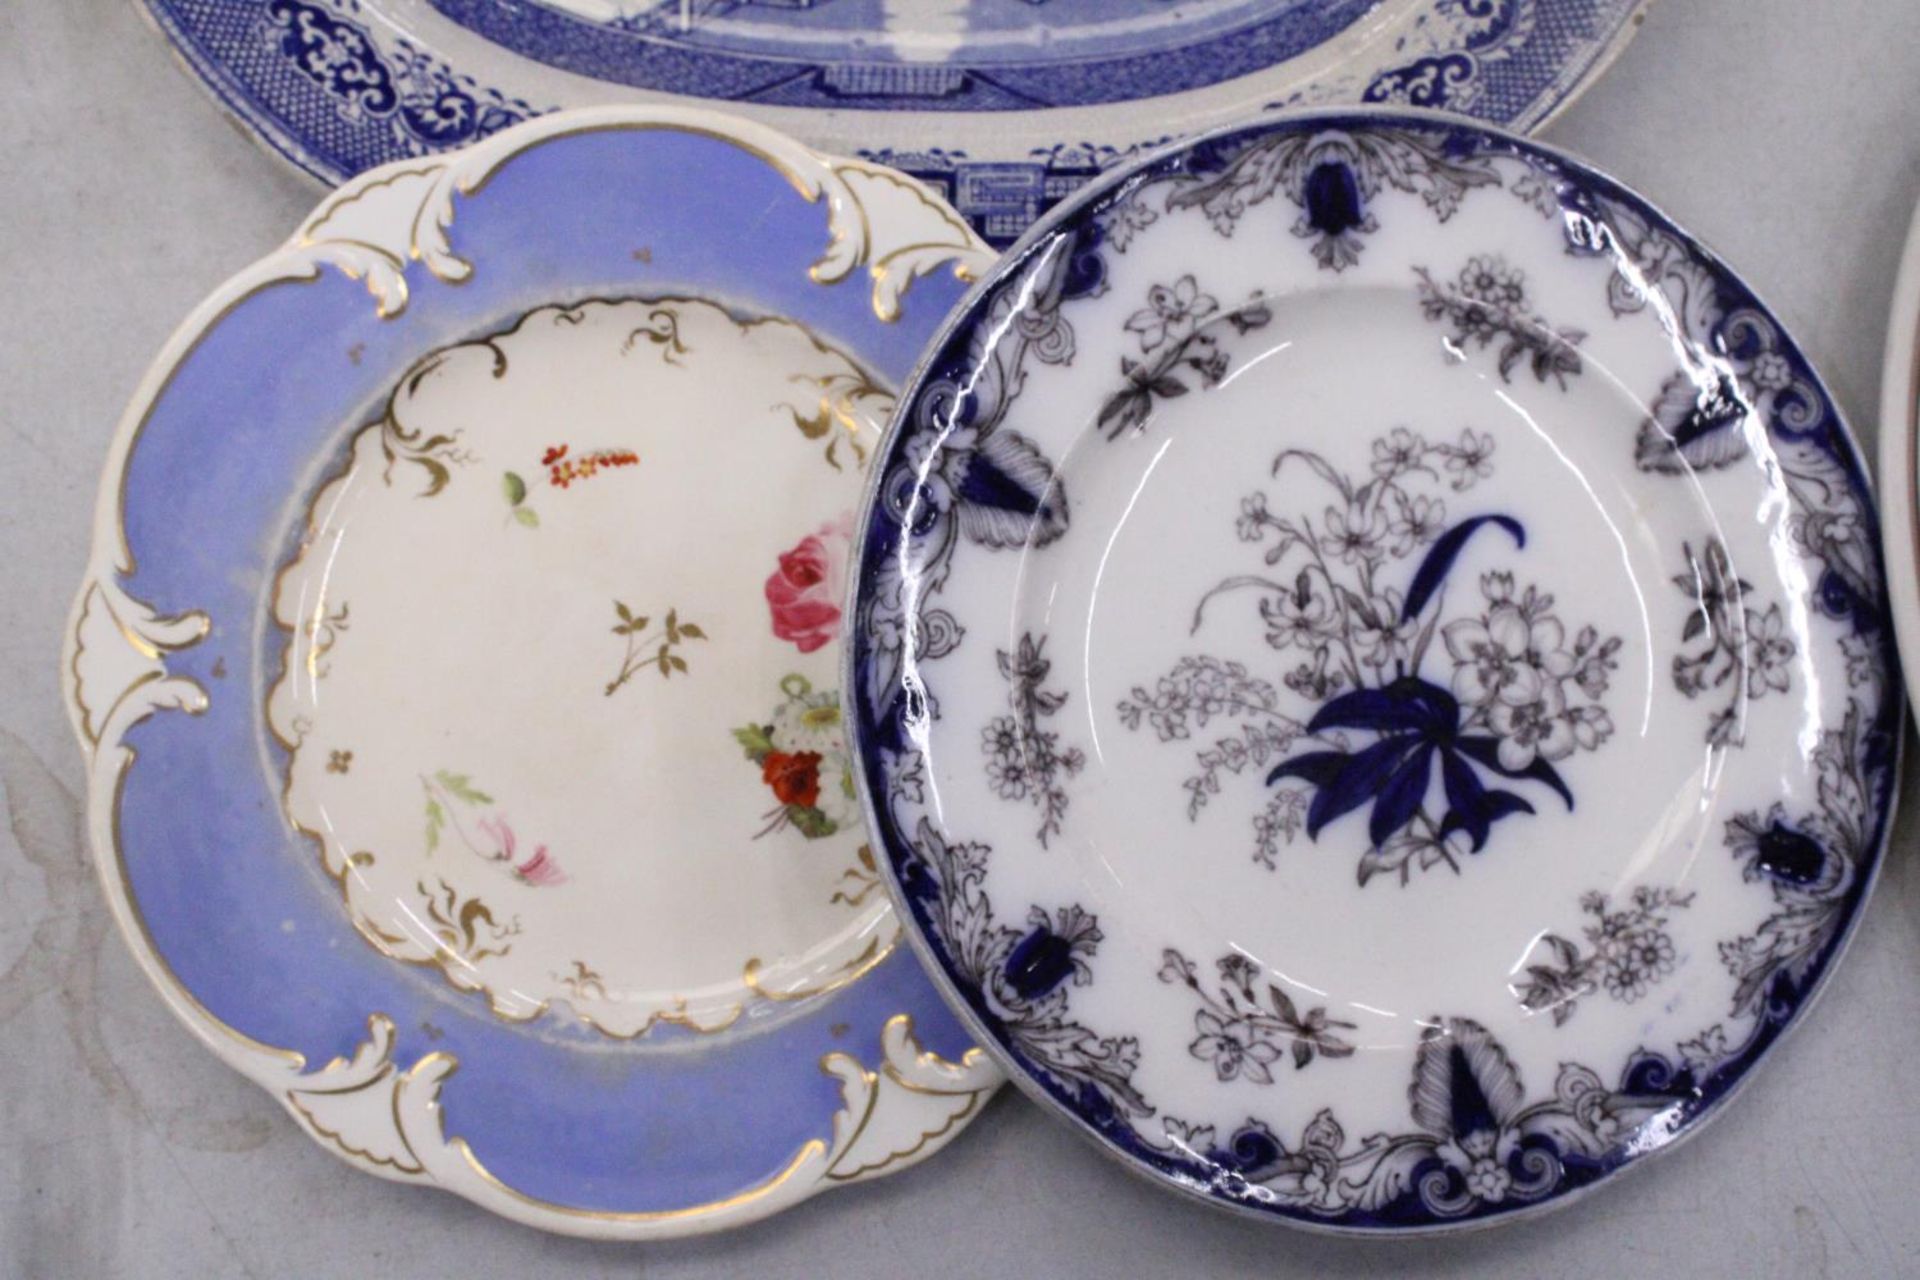 TWO VINTAGE BLUE AND WHITE PLATTERS, CABINET PLATES, AN ONYX TABLE LIGHTER, TRINKET BOX AND FIGURINE - Image 4 of 6